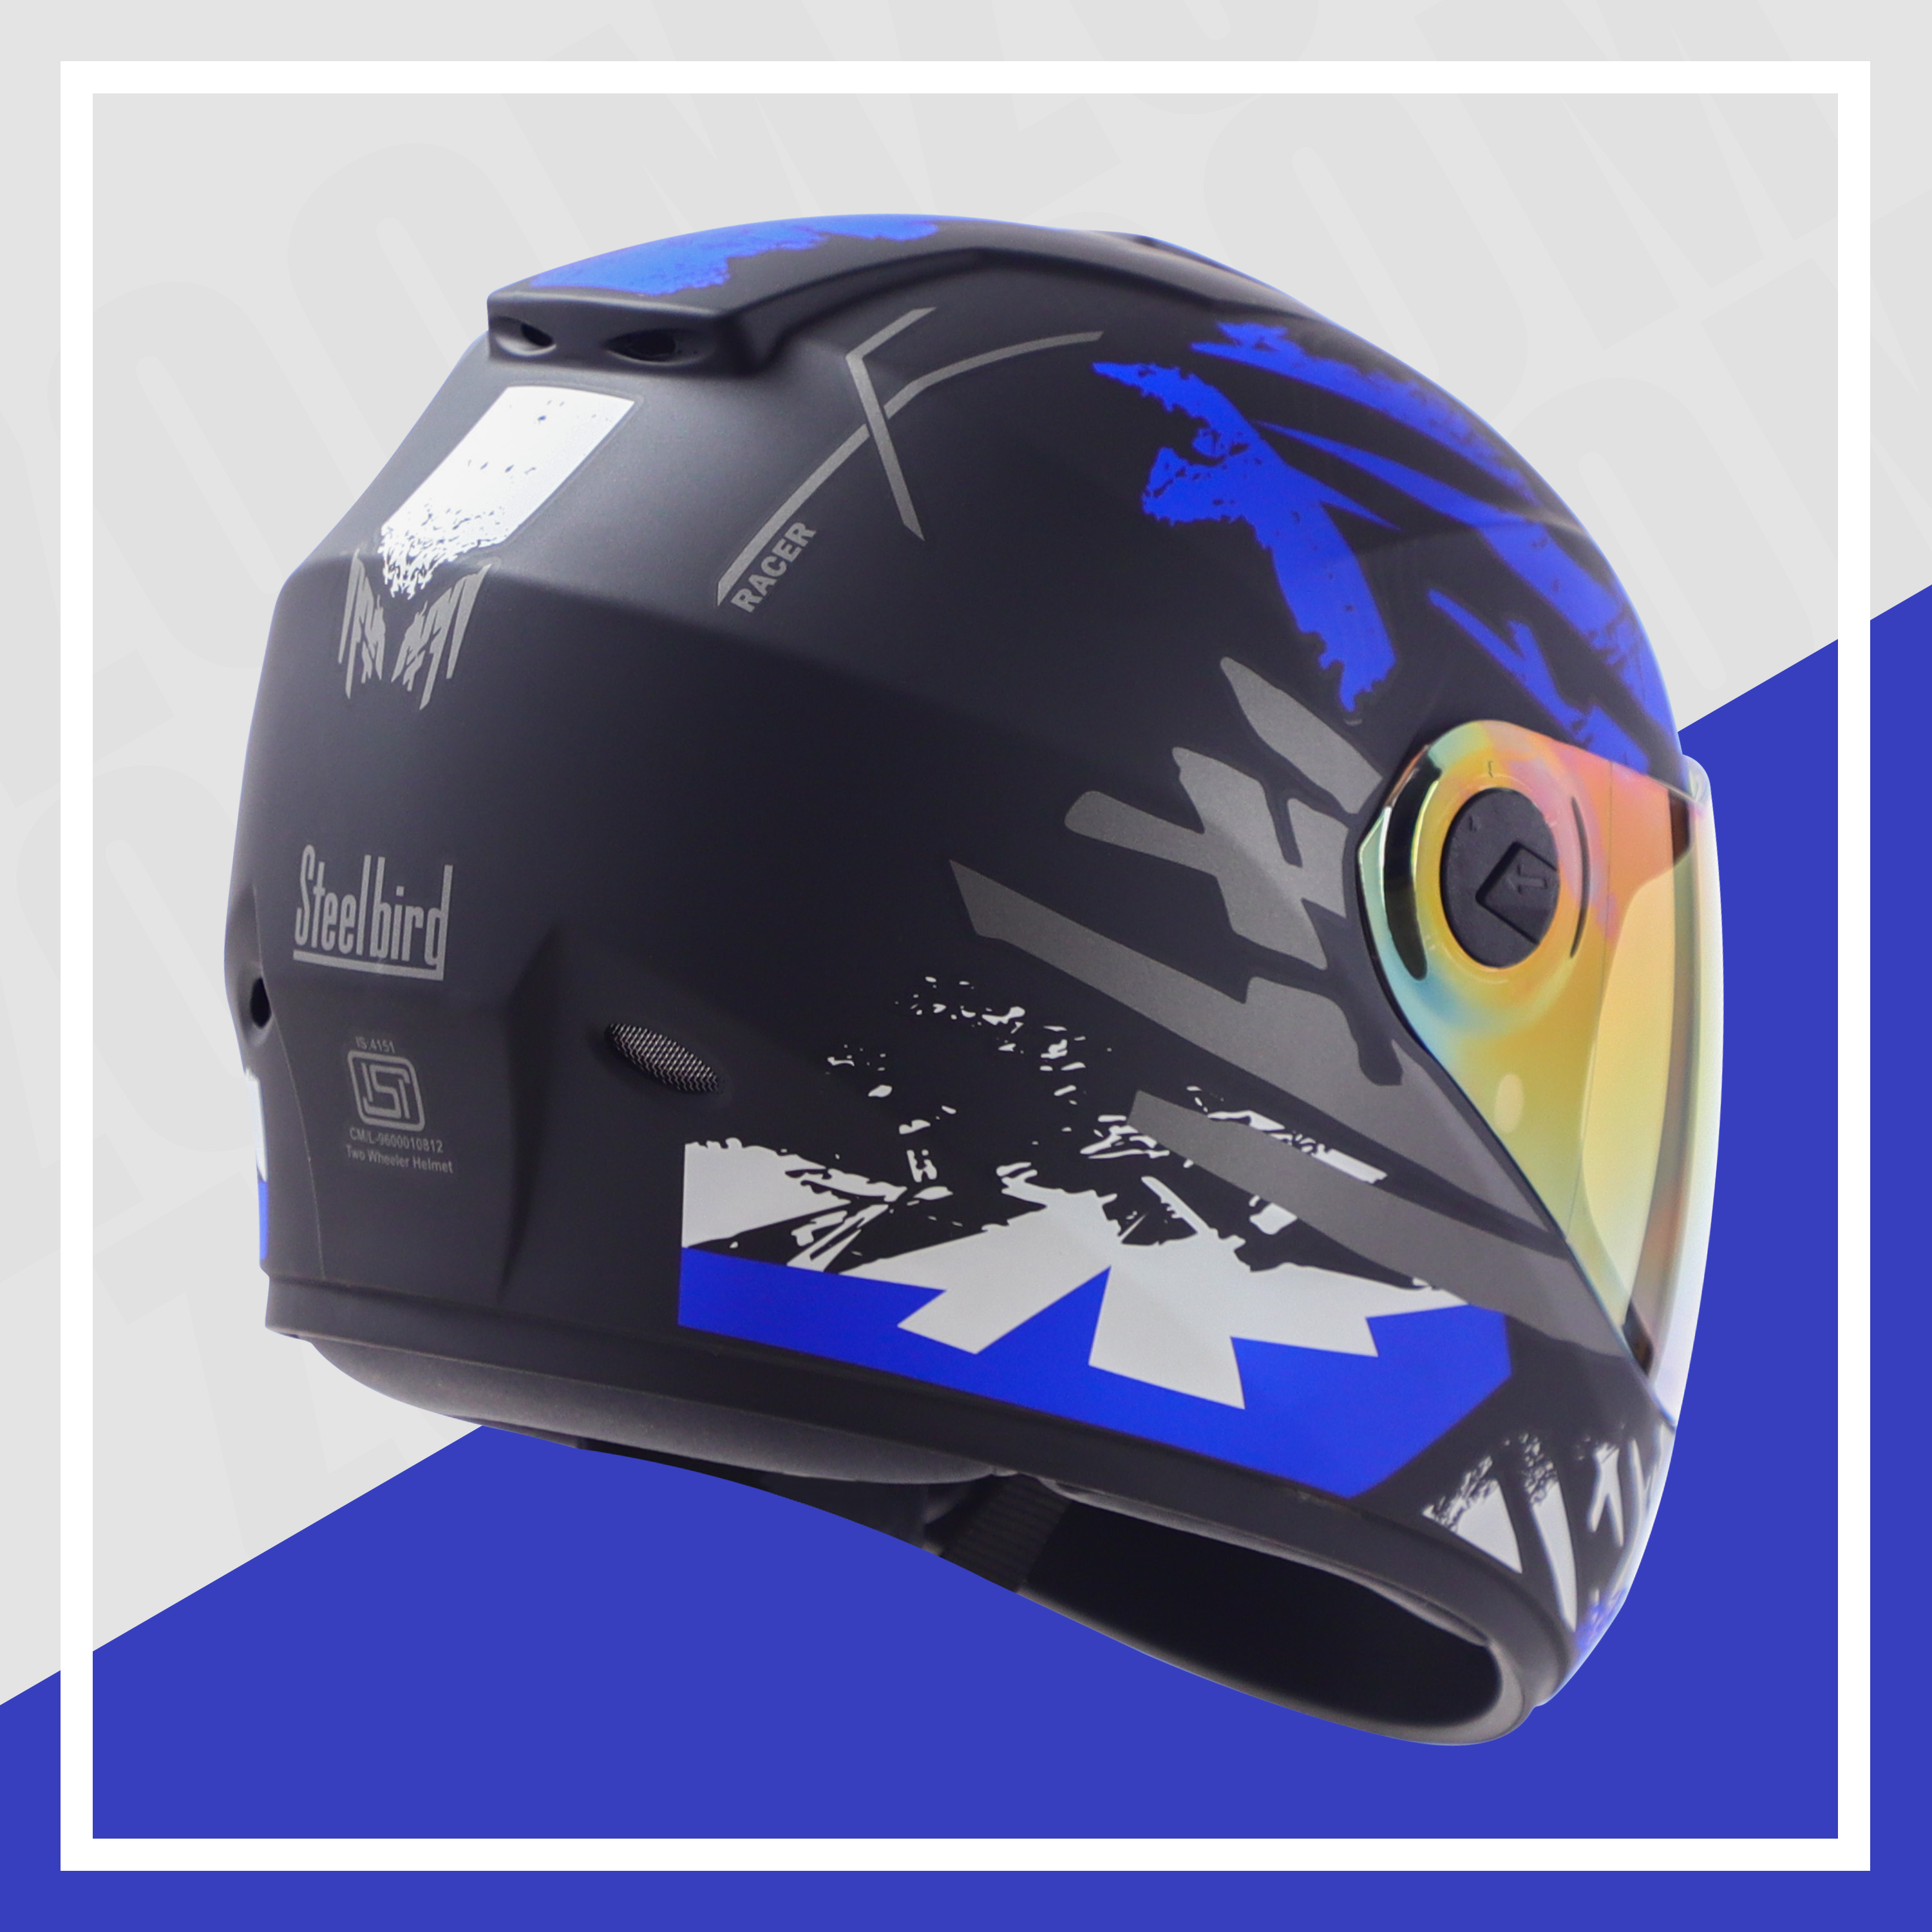 Steelbird SBH-11 Zoom Racer ISI Certified Full Face Graphic Helmet For Men And Women (Glossy Black Blue With Chrome Rainbow Visor)